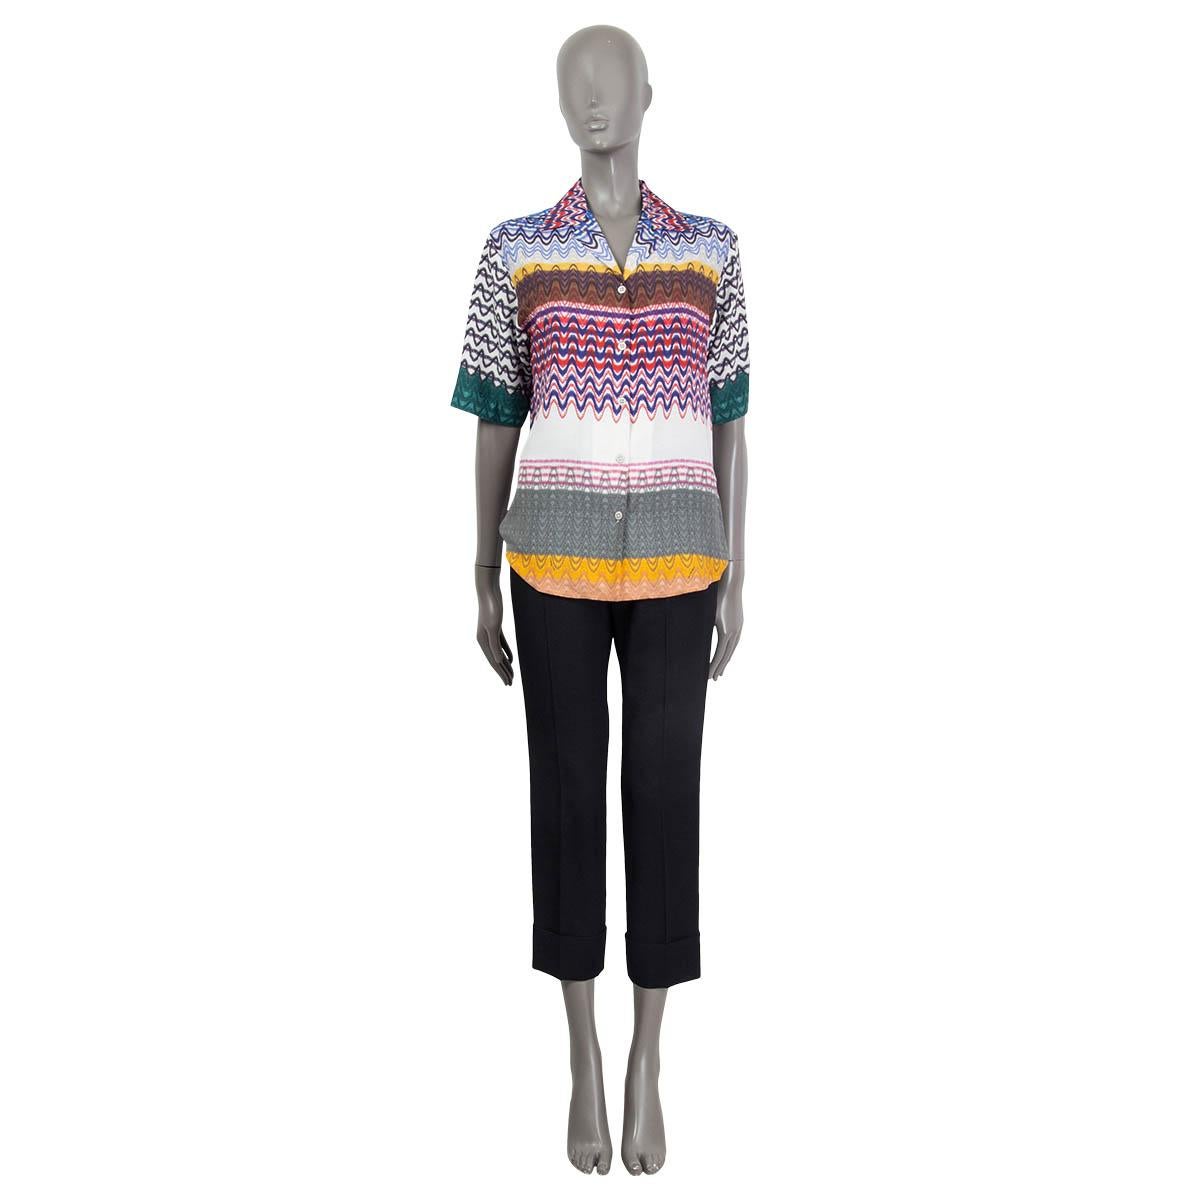 100% authentic Missoni wavy zig zag short sleeve shirt in blue, green, red, yellow, gray and pink viscose (75%) and silk (25%). Opens with five silver metal buttons on the front. Unlined. Brand new, with tags.

Measurements
Tag